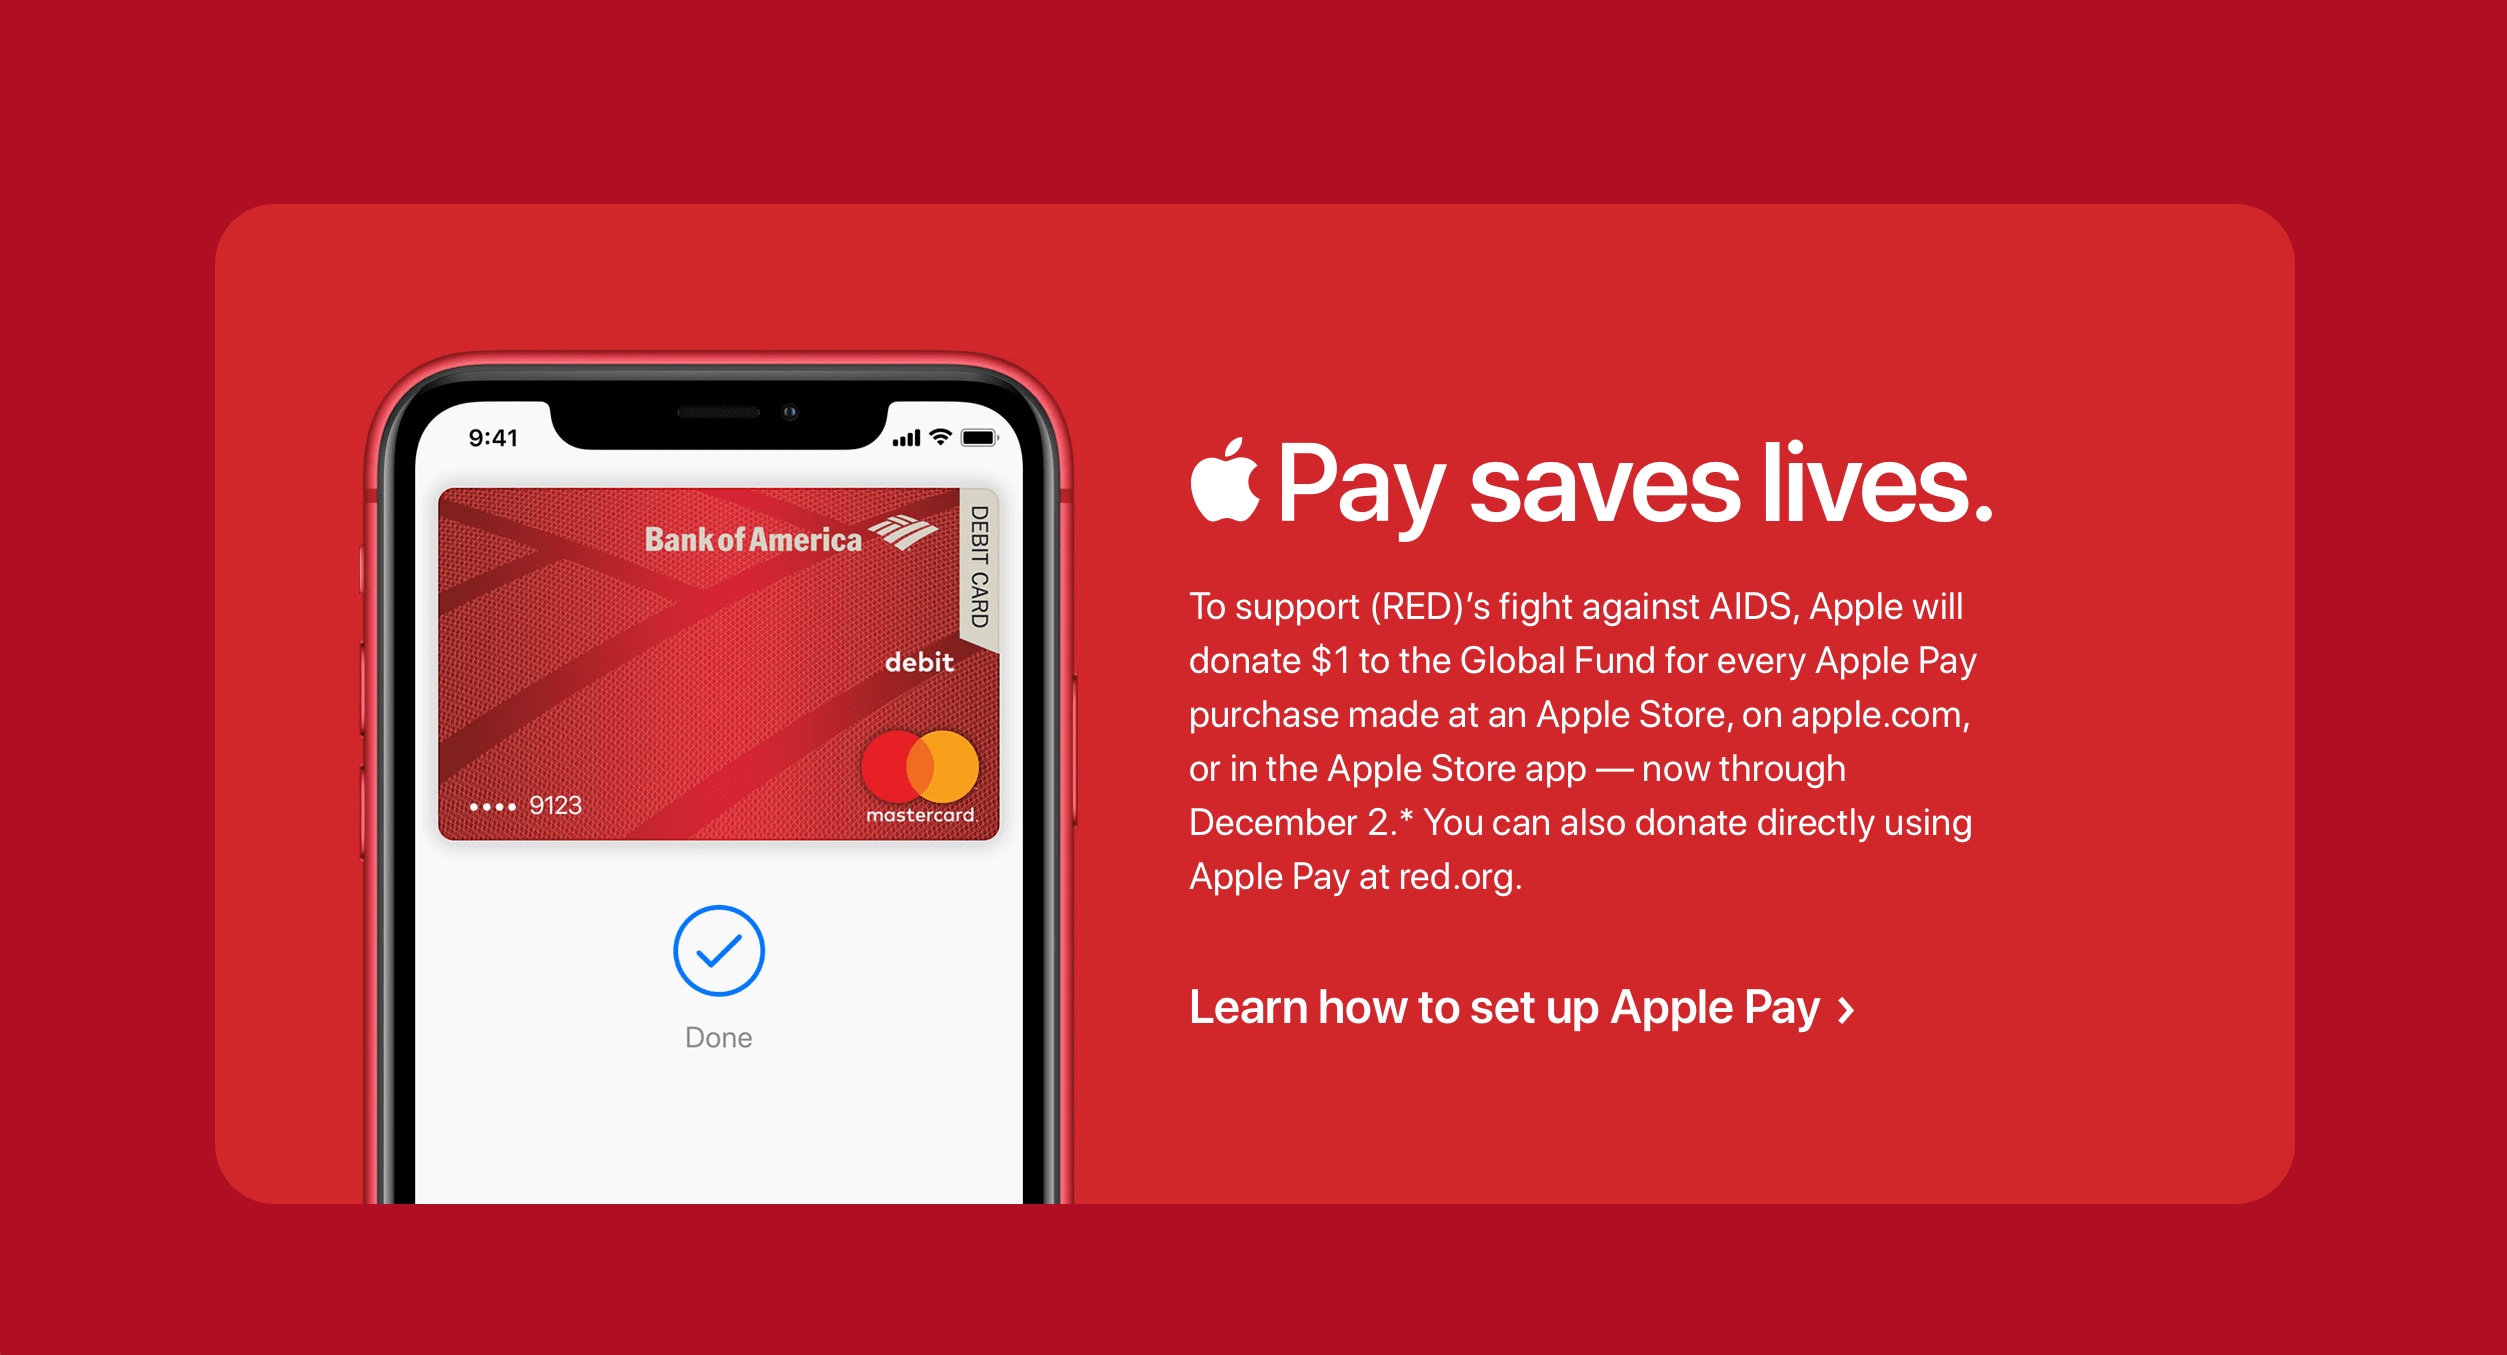 Apple will donate $ 1 to fight AIDS for every purchase made with Apple Pay